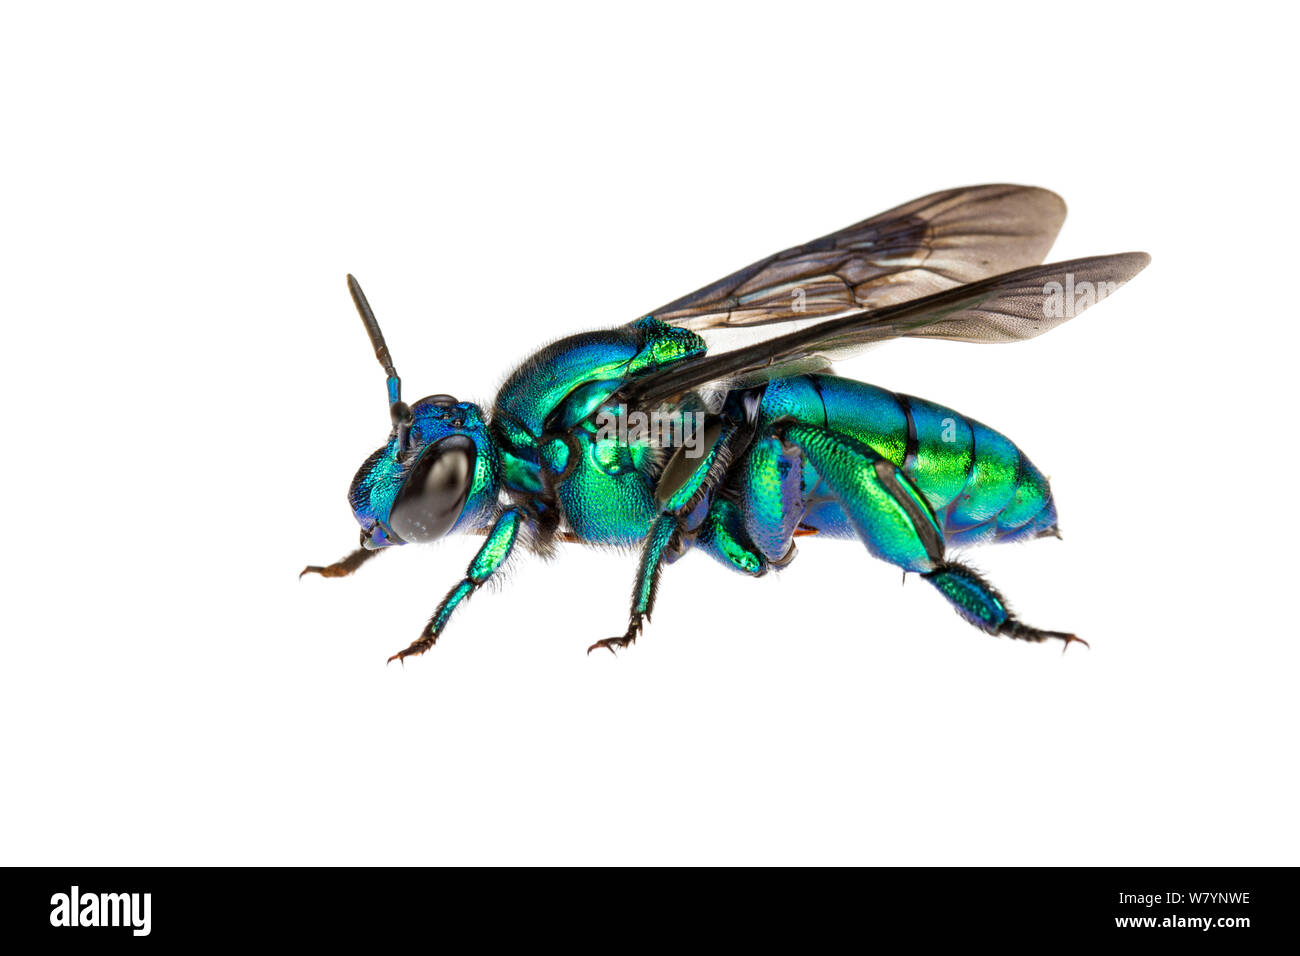 Orchid bee (Exaerete smaragdina), Caves Branch, Cayo District, Belize, September. meetyourneighbours.net project Stock Photo